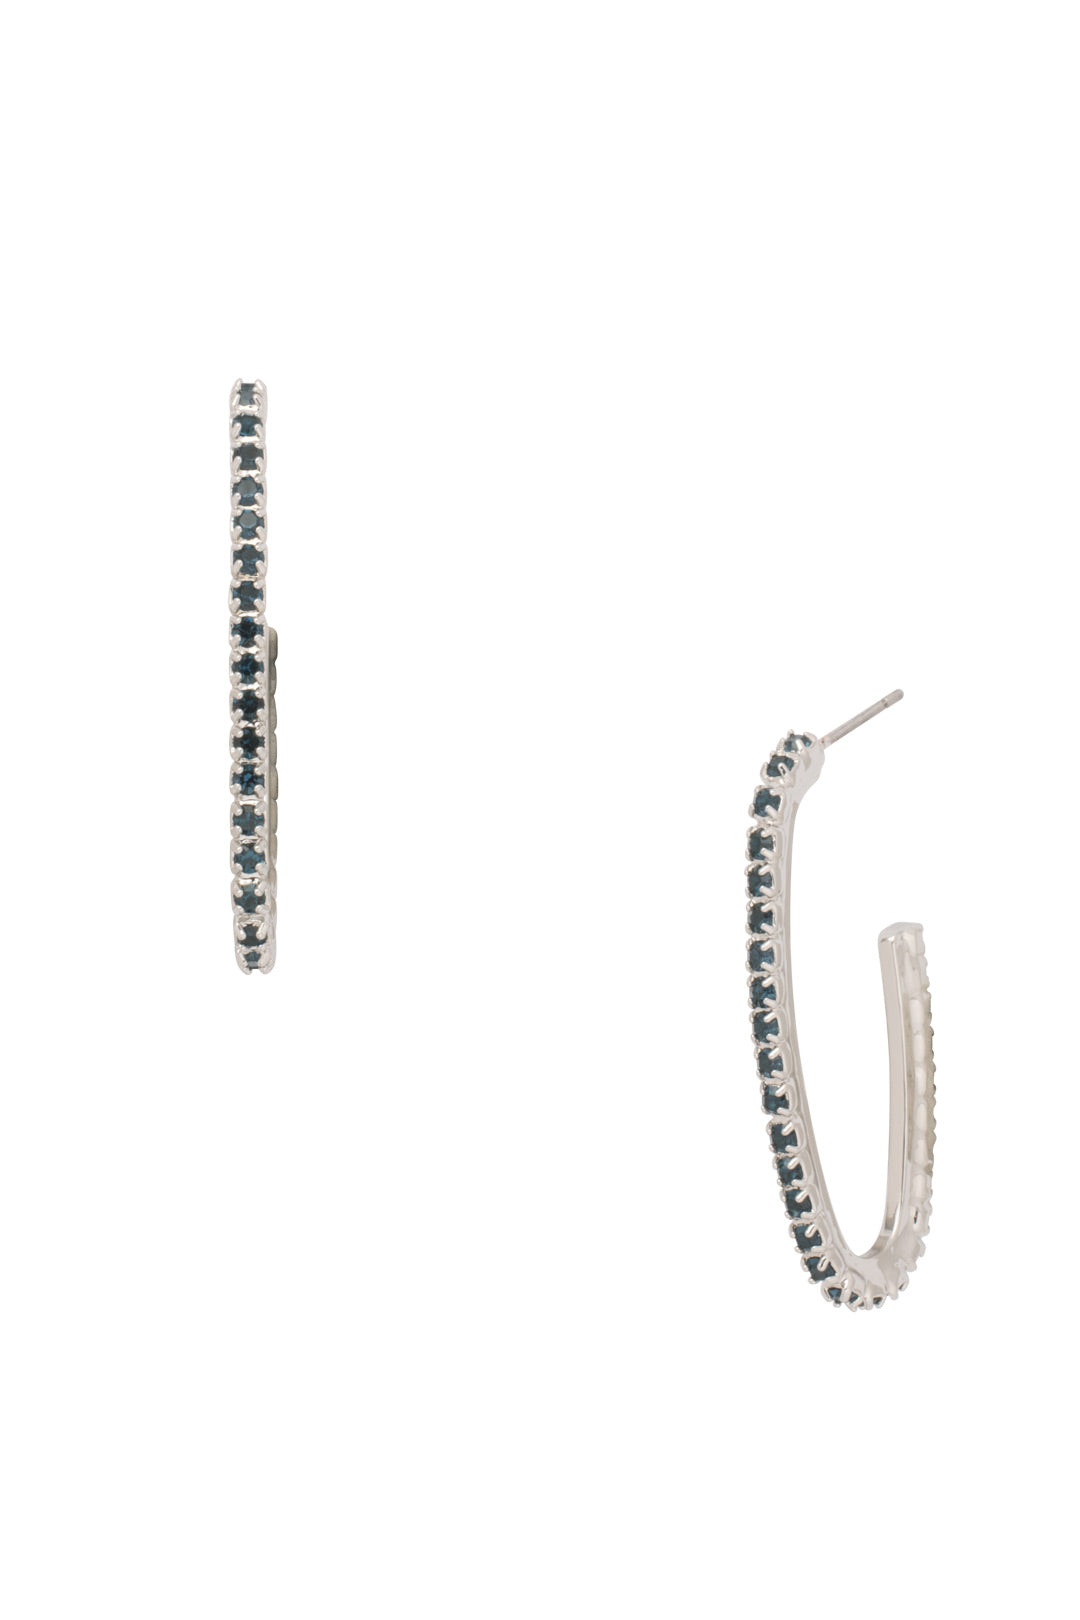 Shay Rhinestone Hoop Earrings - EFL7PDASP - <p>The Shay Rhinestone Hoop Earrings feature a rhinestone embellished open oblong hoop on a post. From Sorrelli's Aspen SKY collection in our Palladium finish.</p>